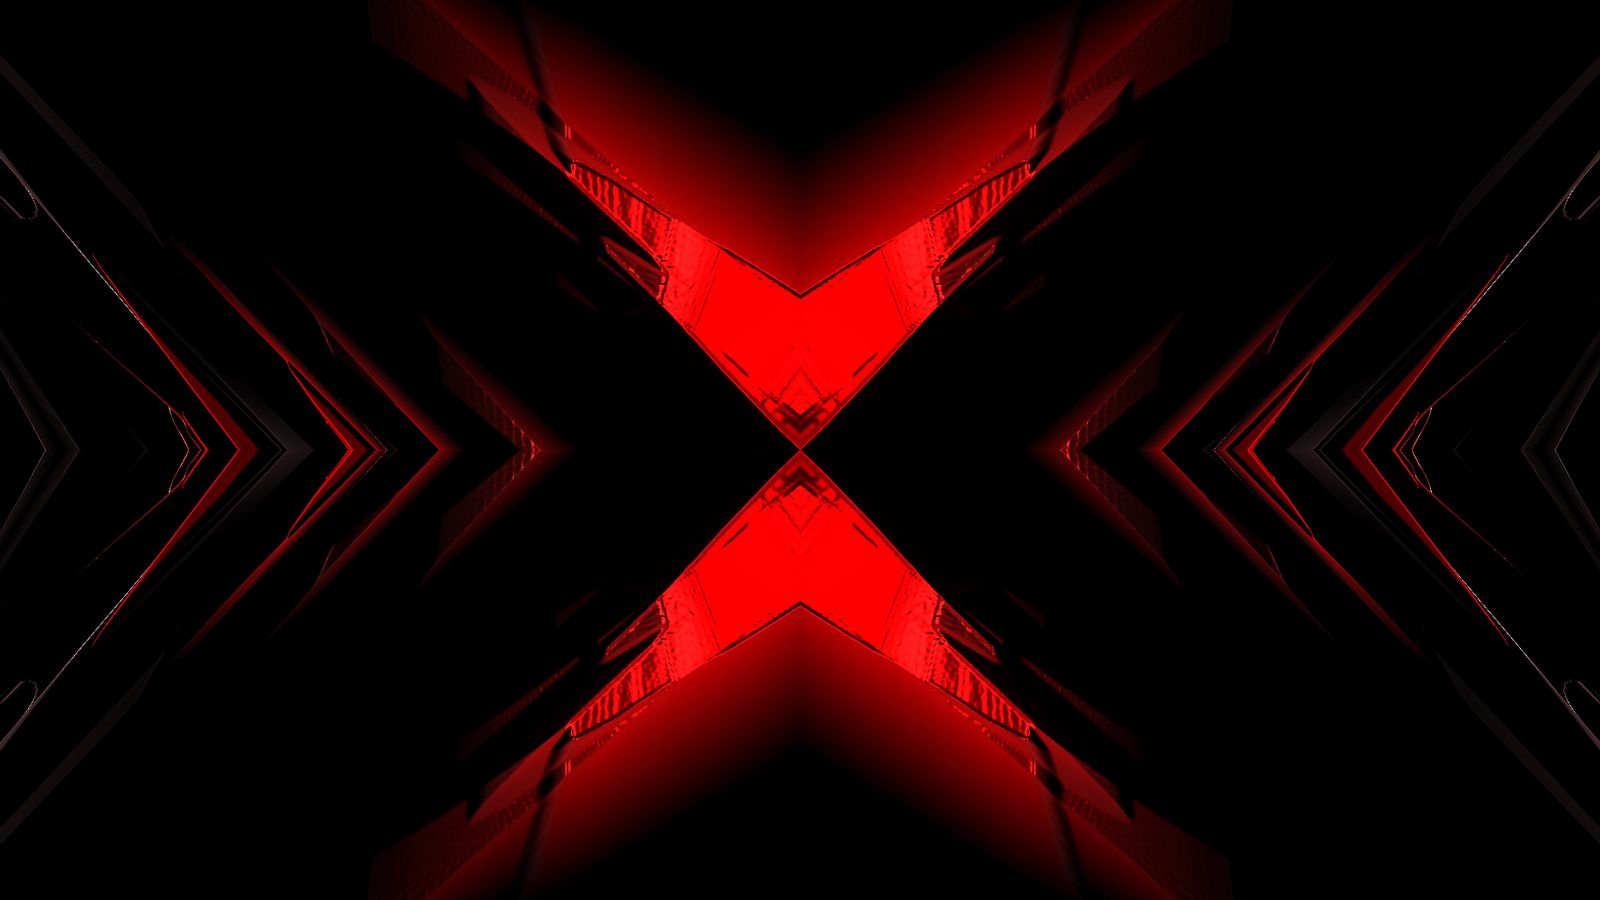 Download wallpaper 1600x900 abstraction, red, black, dark widescreen 16:9  hd background